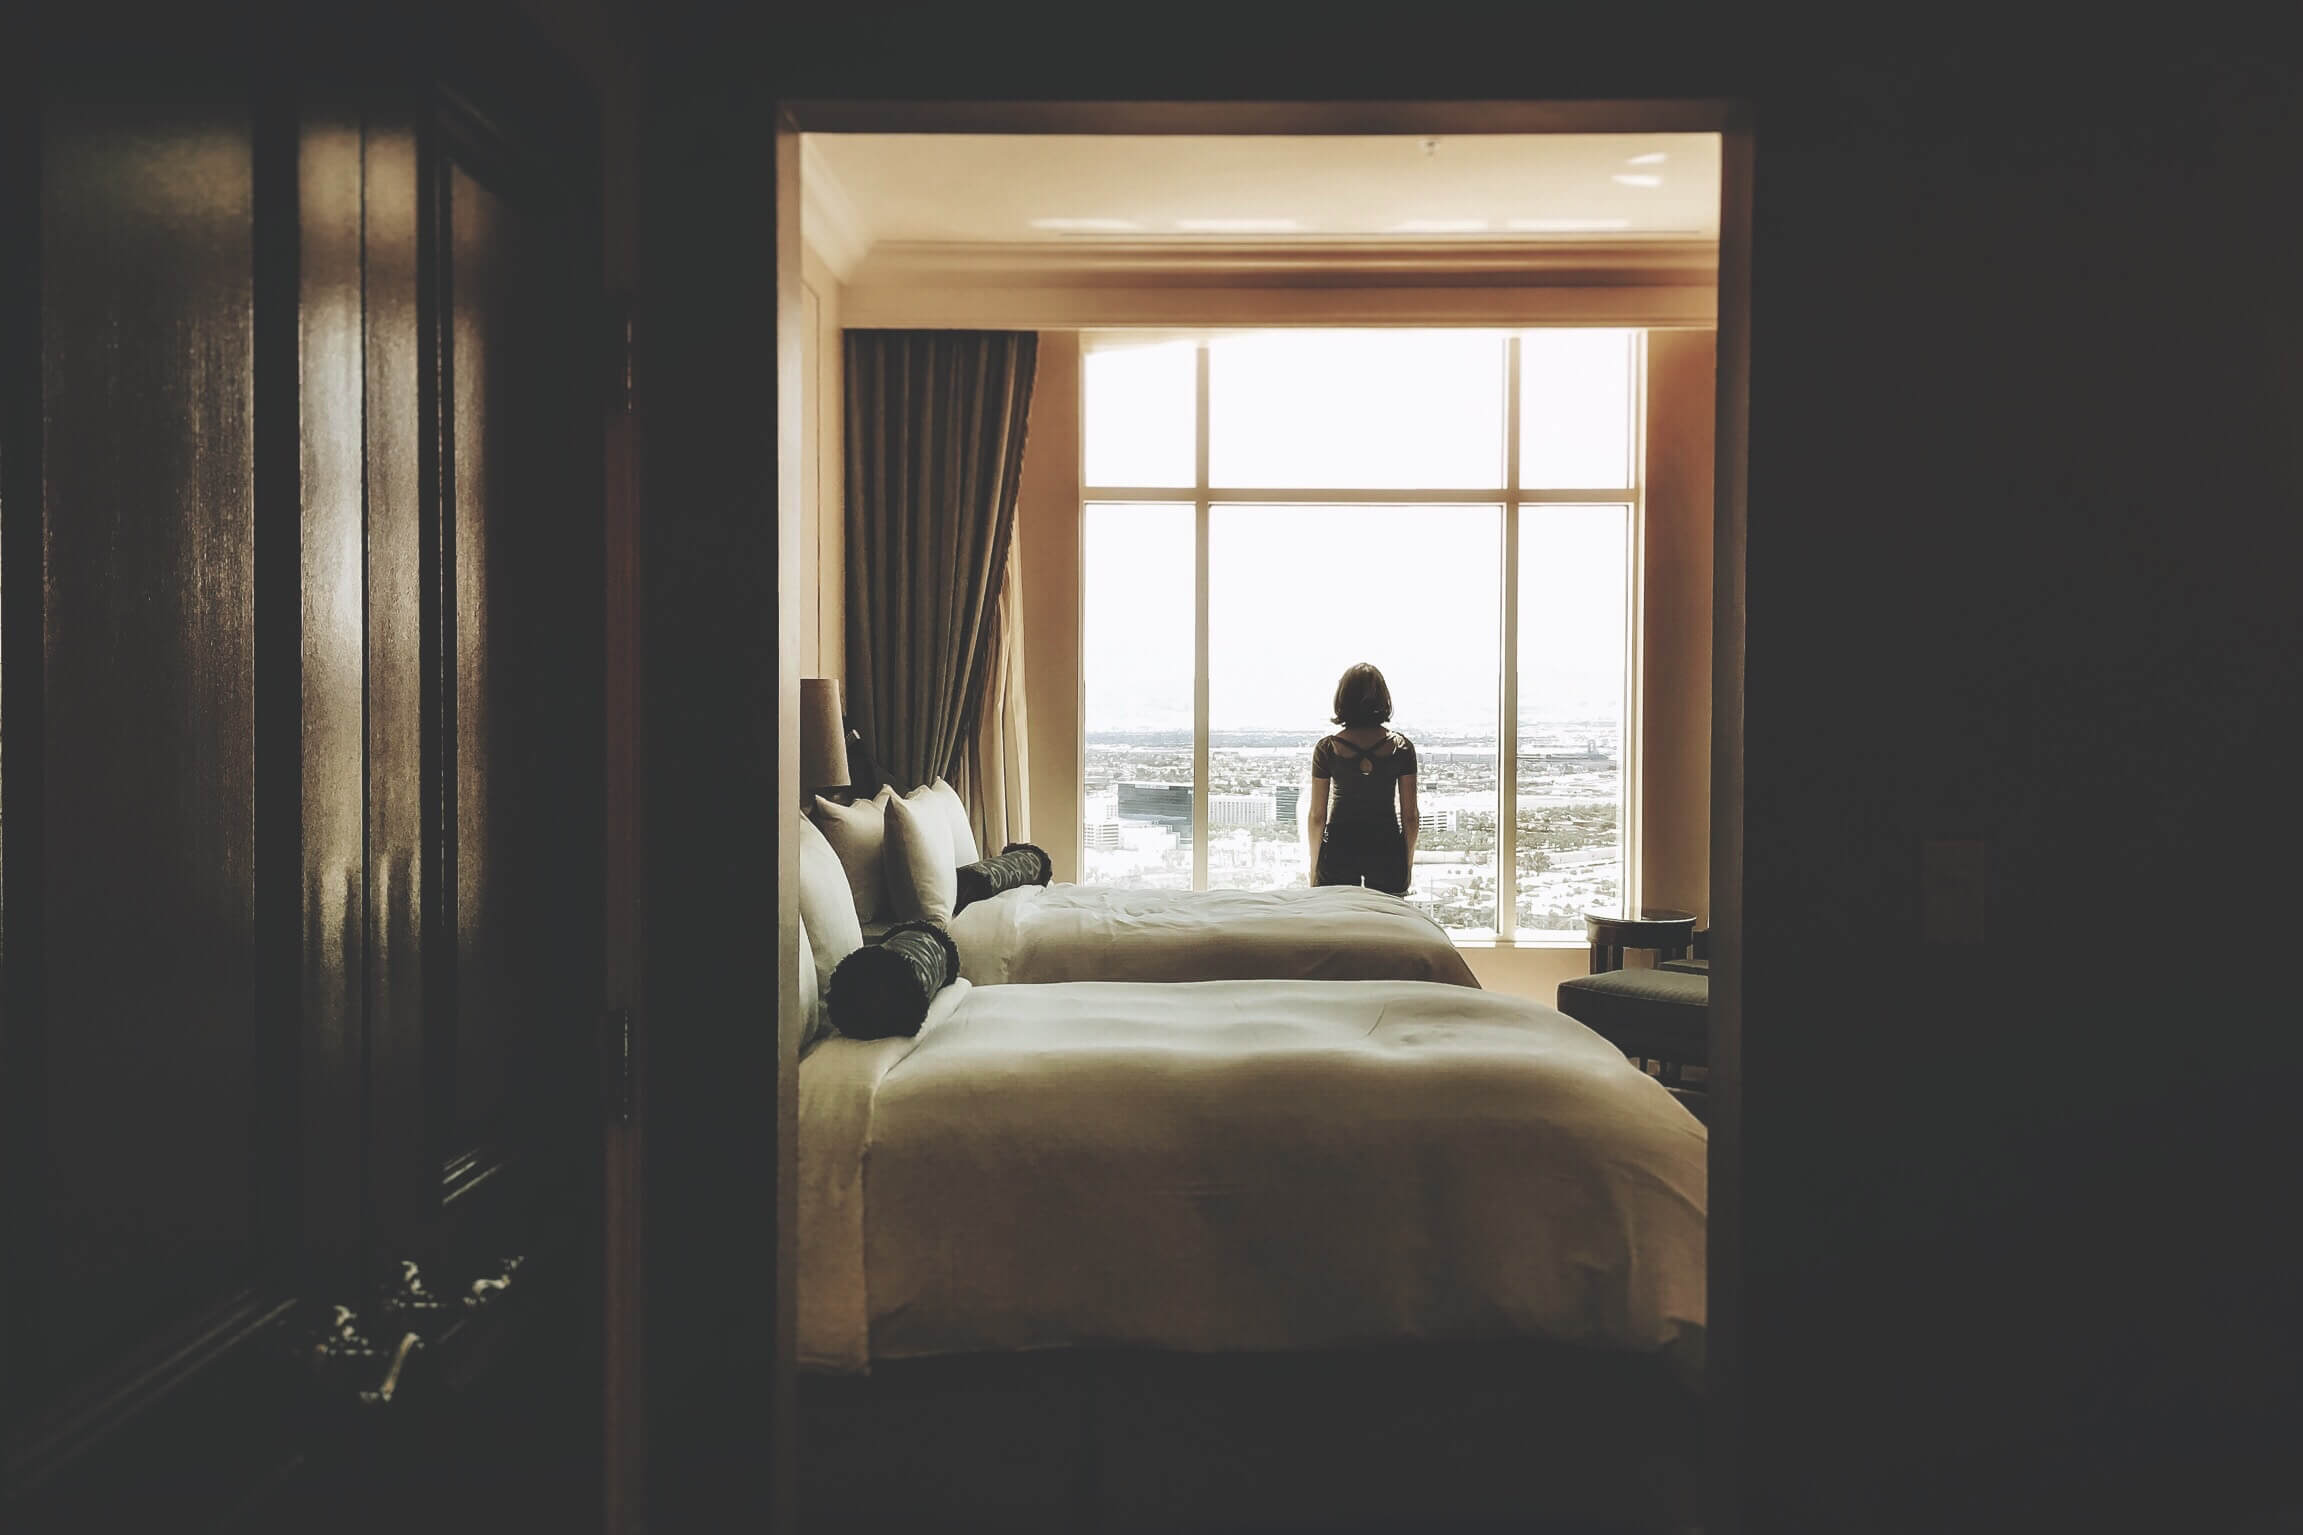 10 Questions to Ask Before Your Hotel Check-In